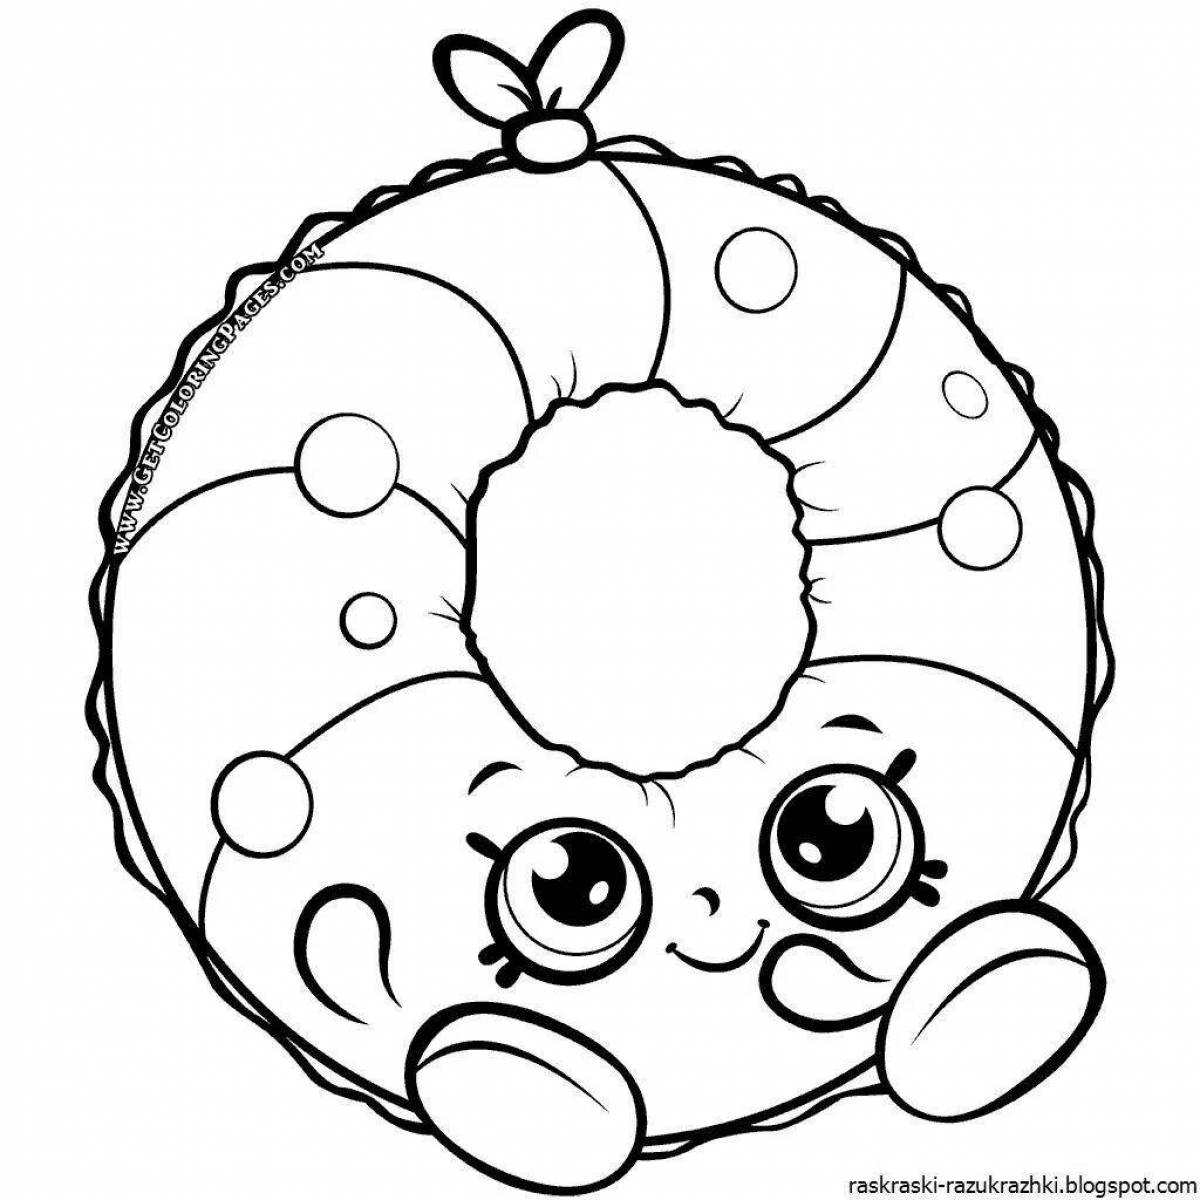 Color-explosion slime coloring page for children